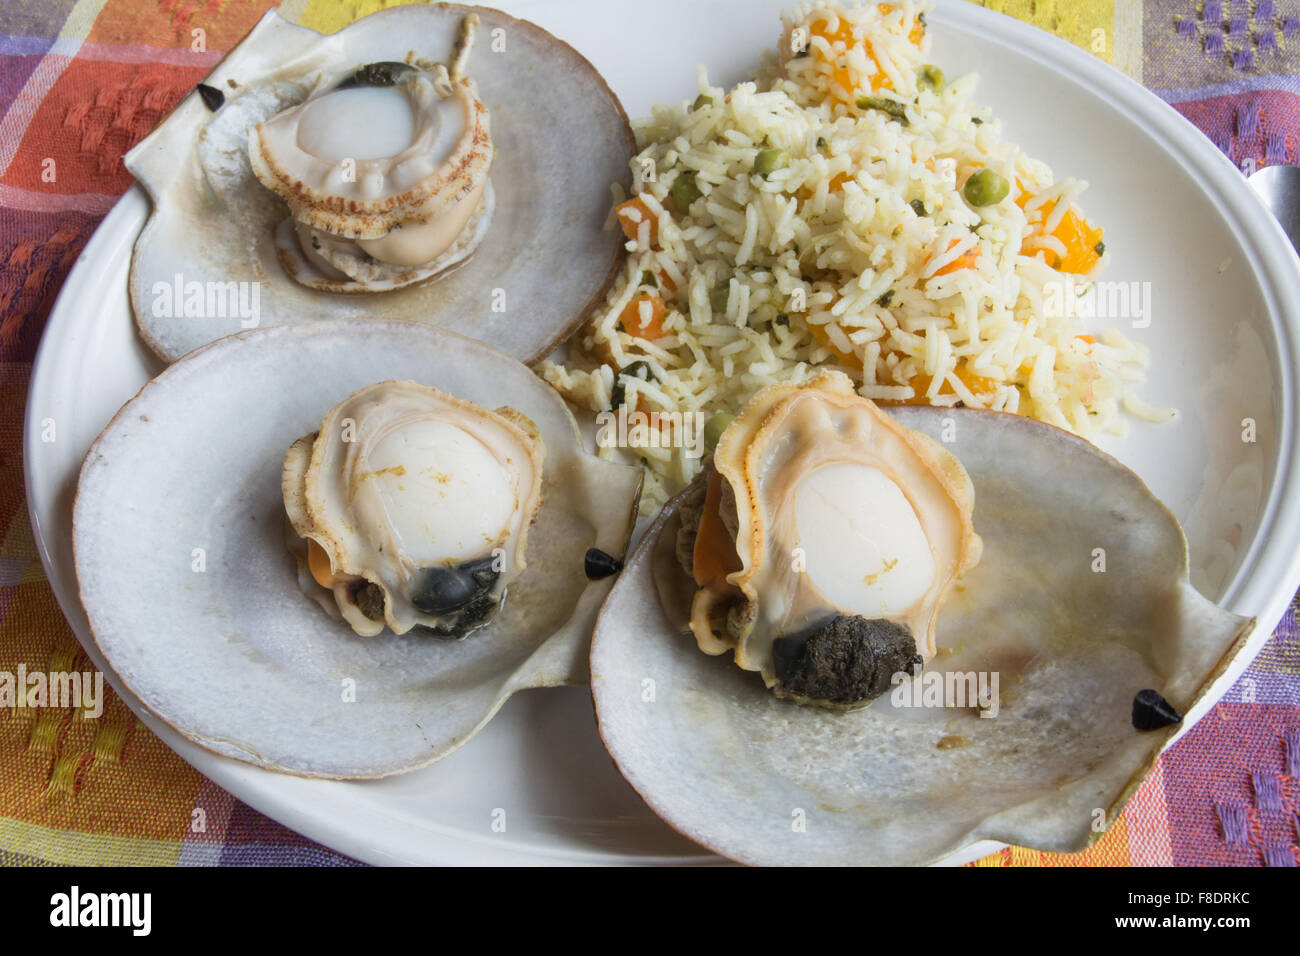 Farmed aquaculture Atlantic scallops served in the shell and with their dark stomach pouches on a plate of rice. Quebec, Canada. Stock Photo